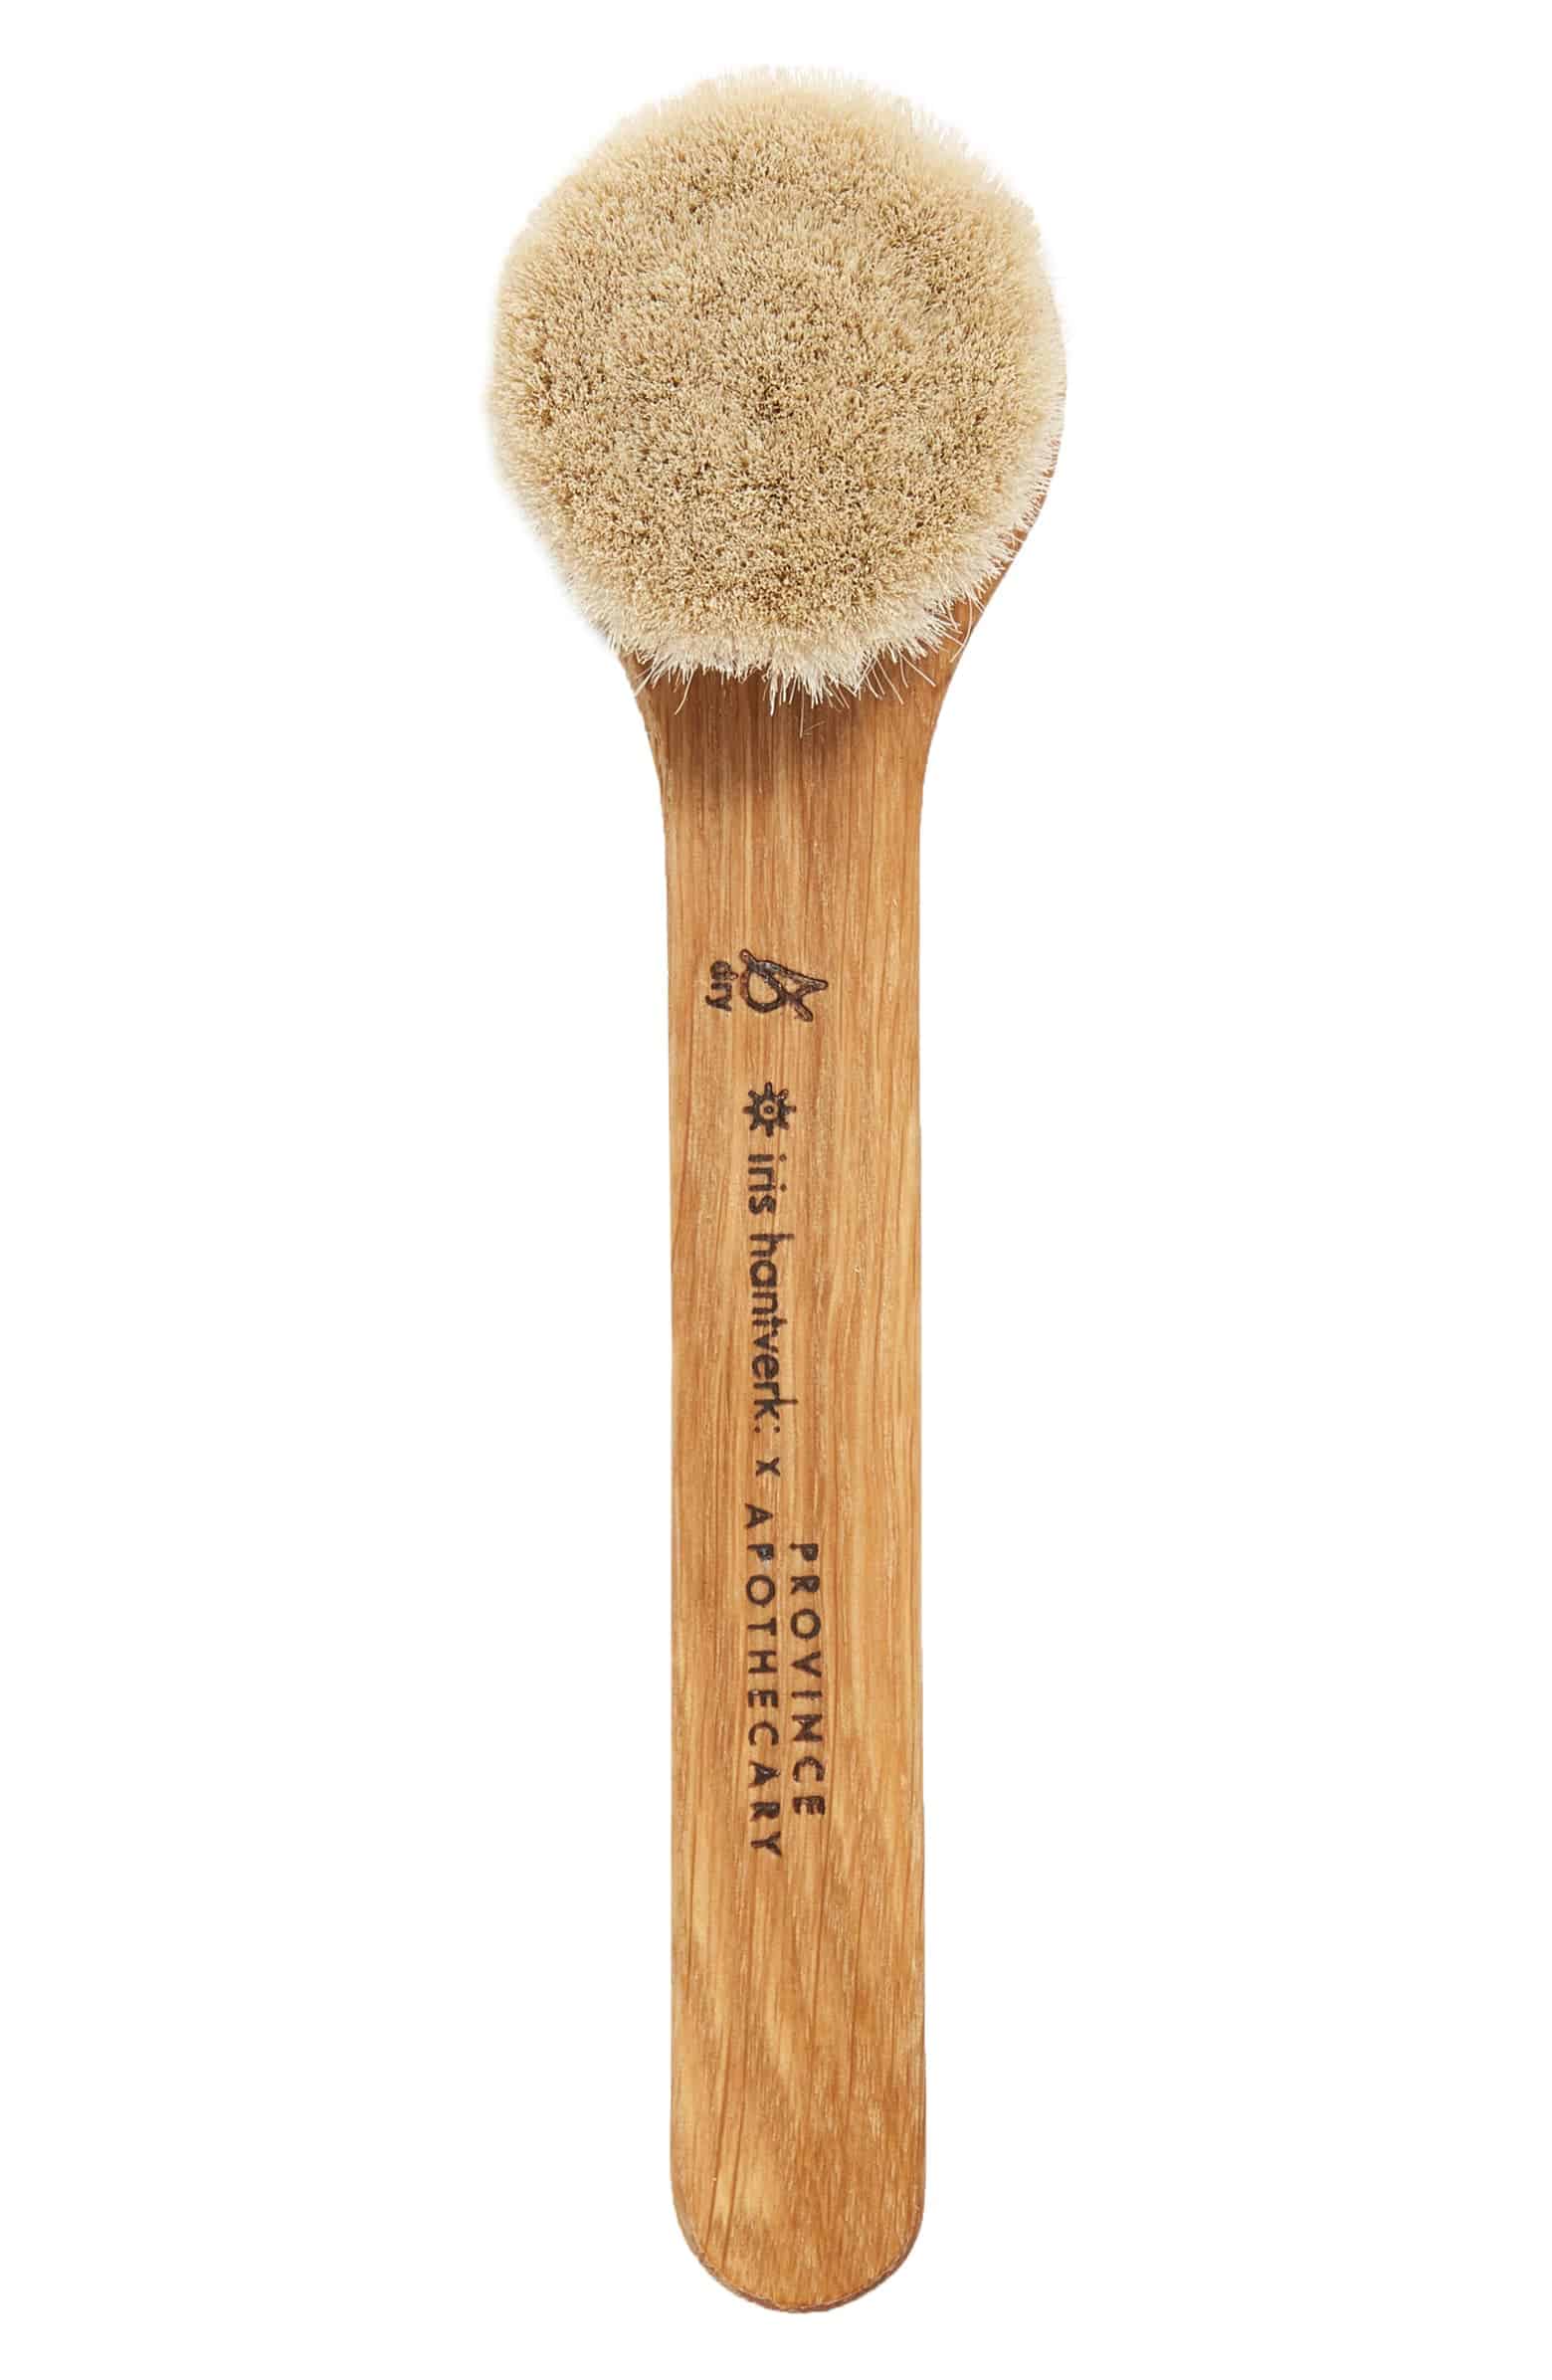 province apothecary facial dry brush